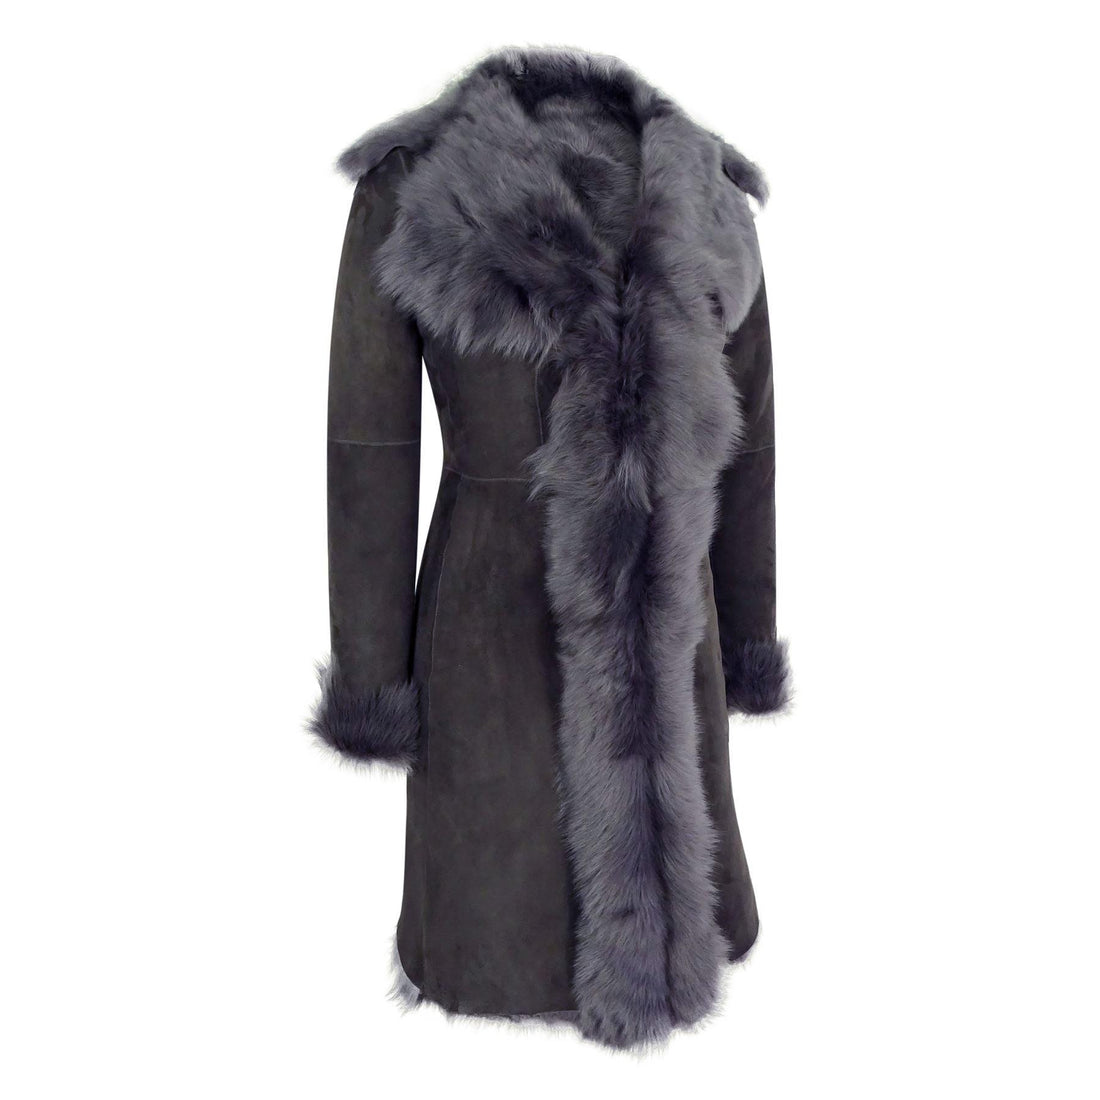 Grey 3/4 Length Ladies Suede Real Luxury Toscana Sheepskin Coat Tailored Fit - Knighthood Store